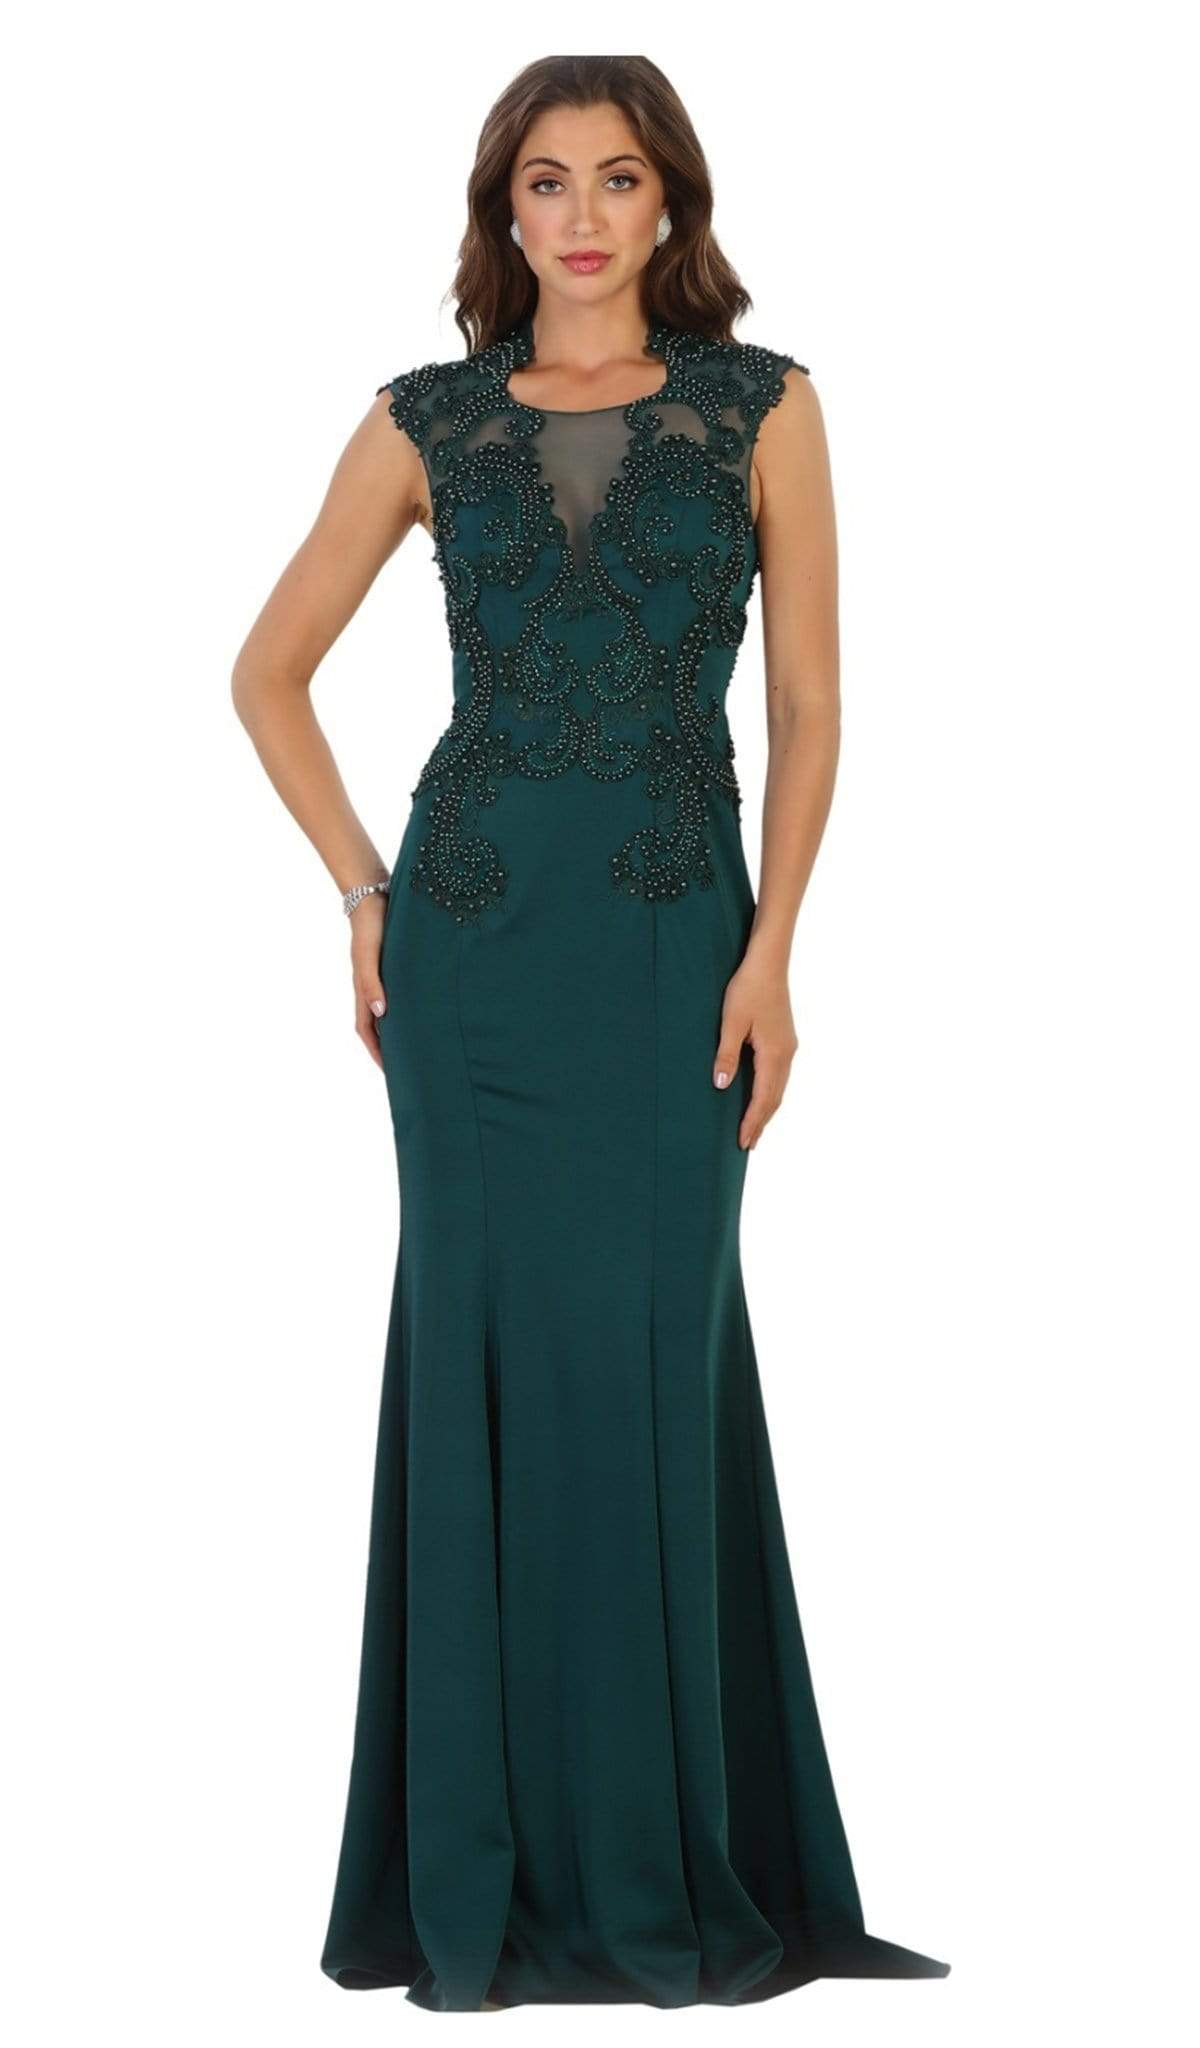 May Queen - RQ7534 Beaded Queen Anne Mermaid Gown Special Occasion Dress 4 / Hunter-Grn